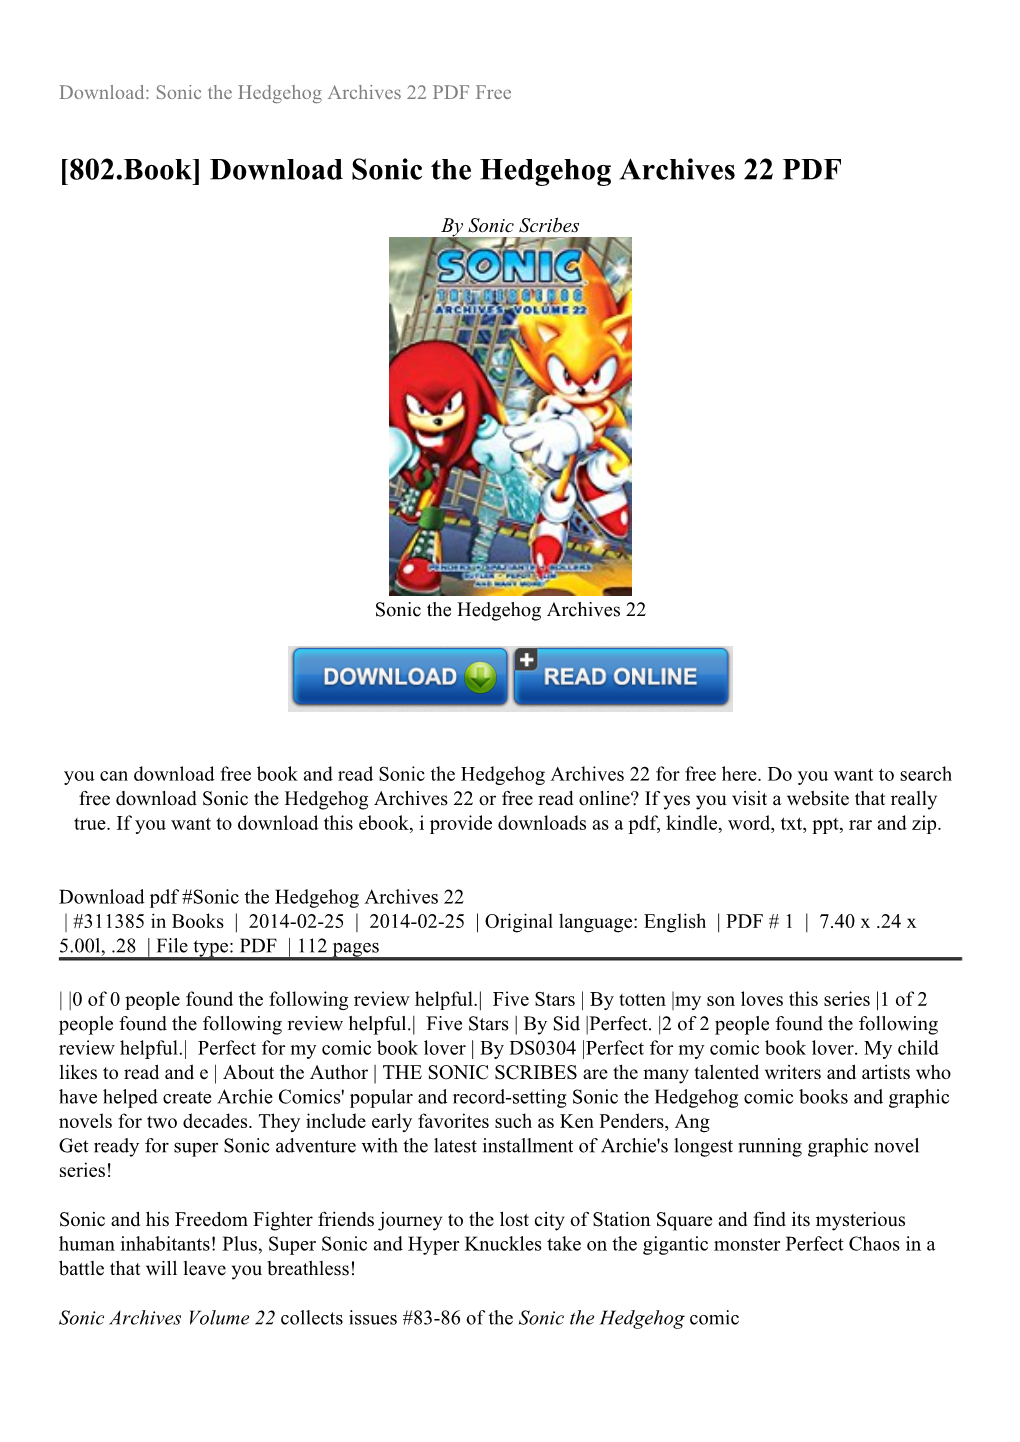 Download Sonic the Hedgehog Archives 22 PDF